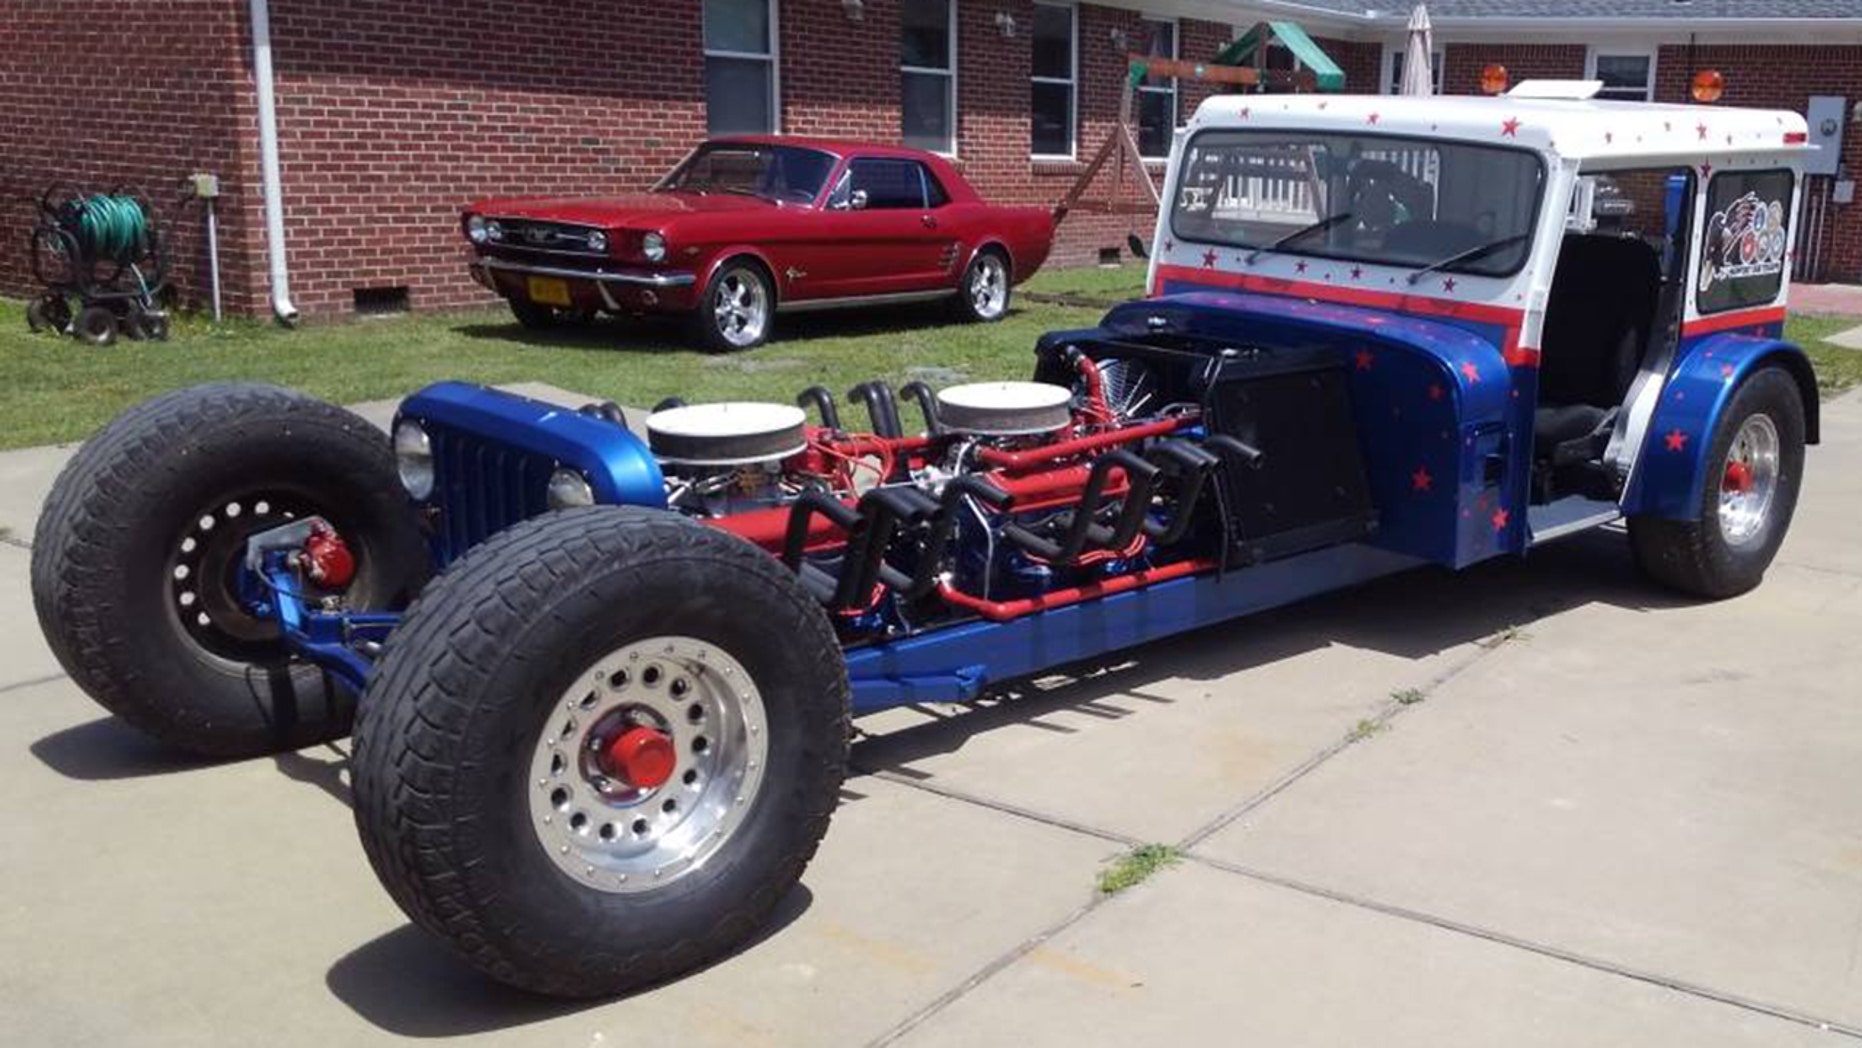 Twin-engine mail Jeep is quite a stretch